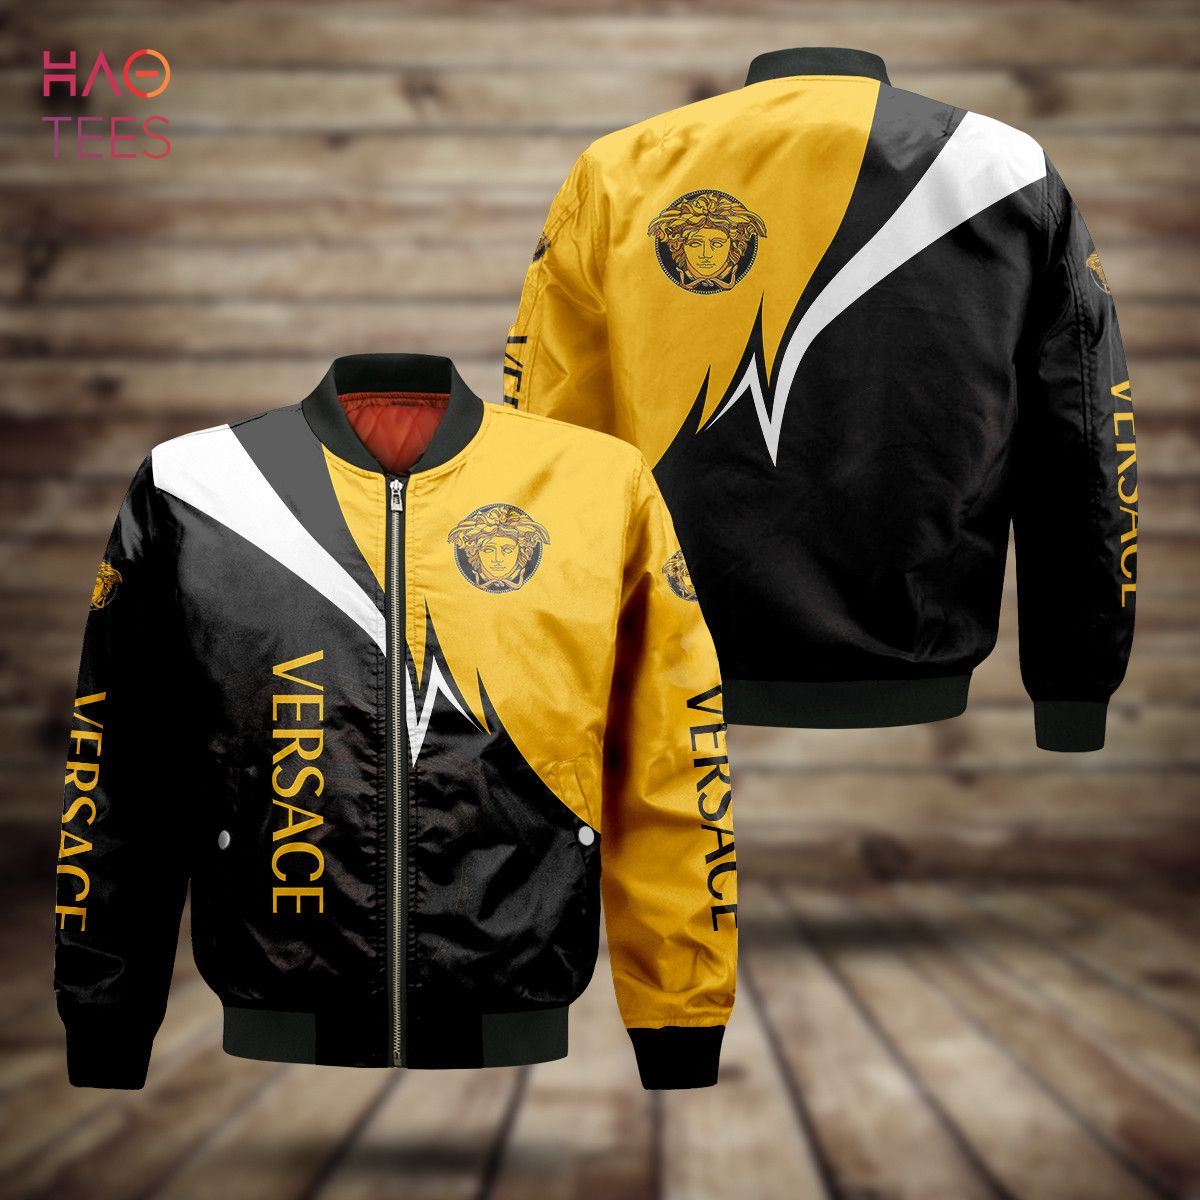 THE BEST Versace Luxury Brand White Black Gold Bomber Jacket Limited Edition